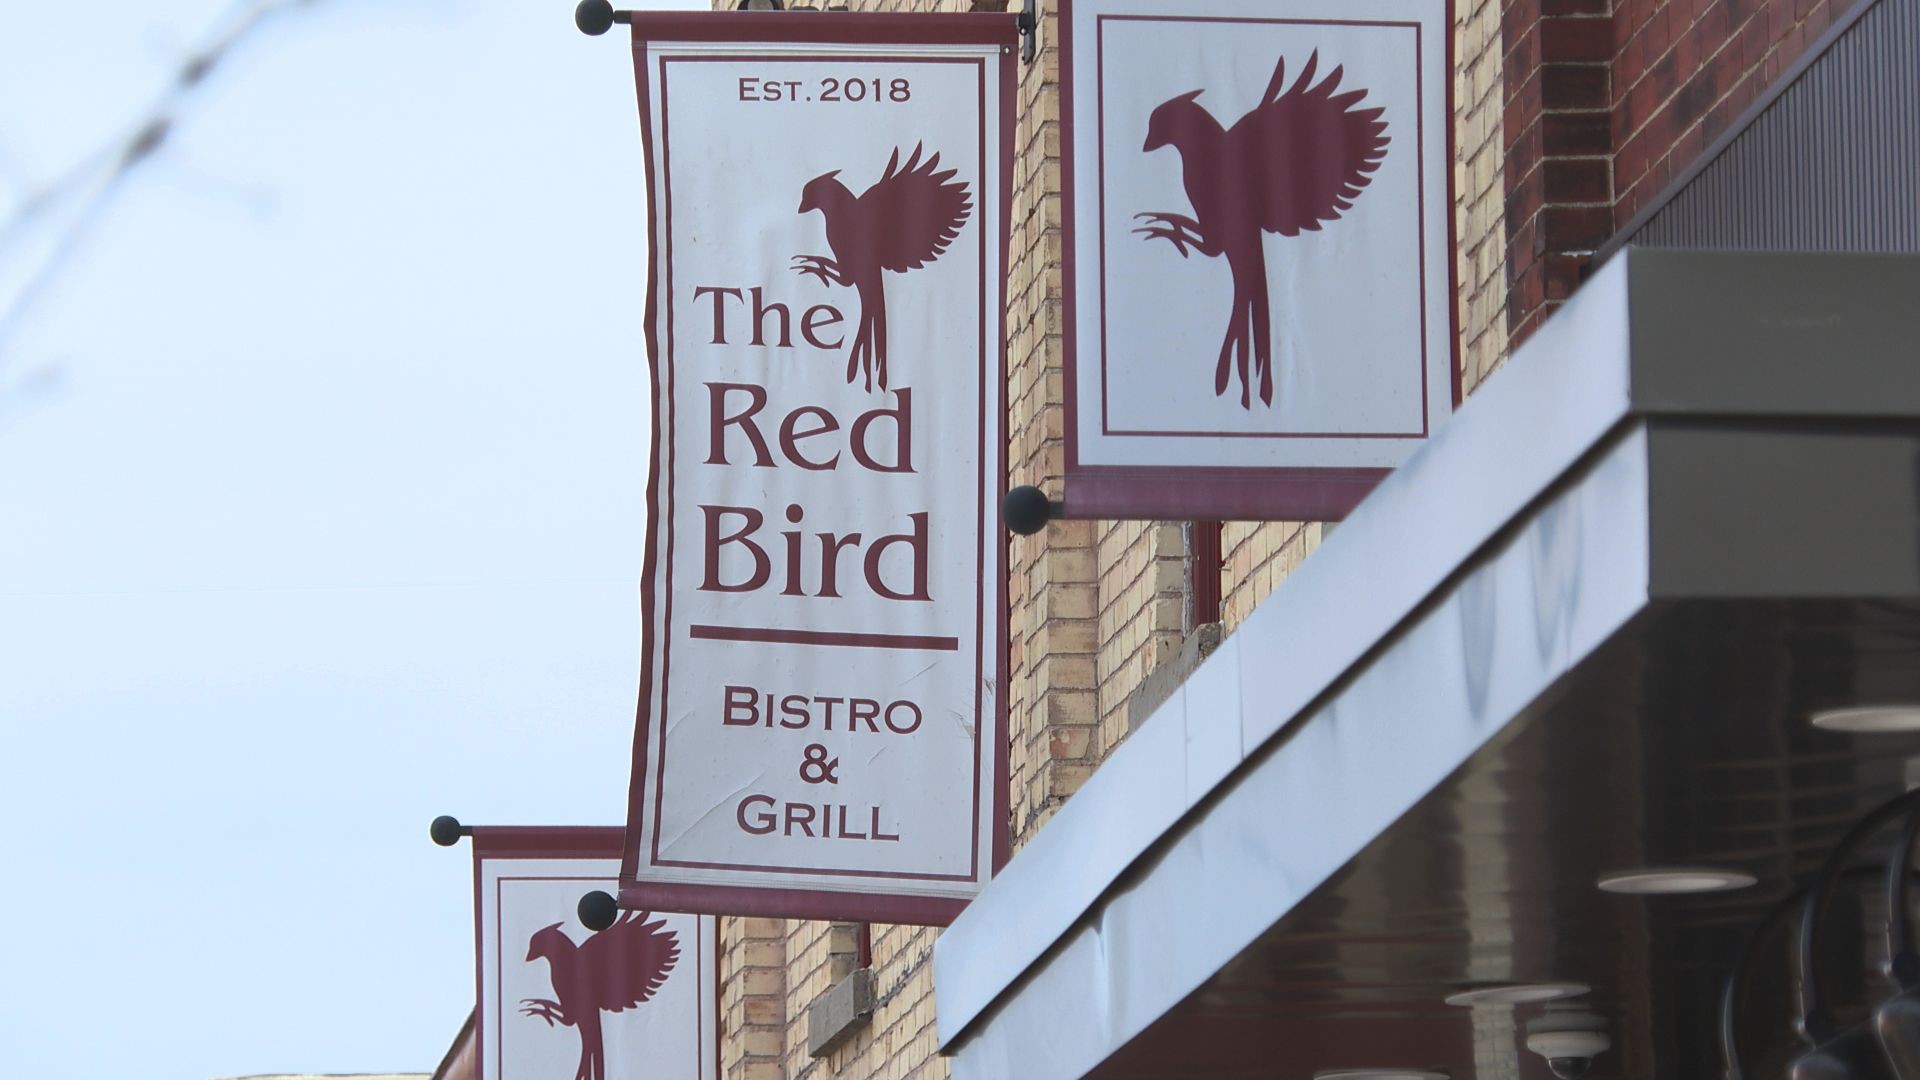 A film crew showed up at Red Bird Bistro & Grill in Cedar Springs Tuesday to see what the hype is all about.